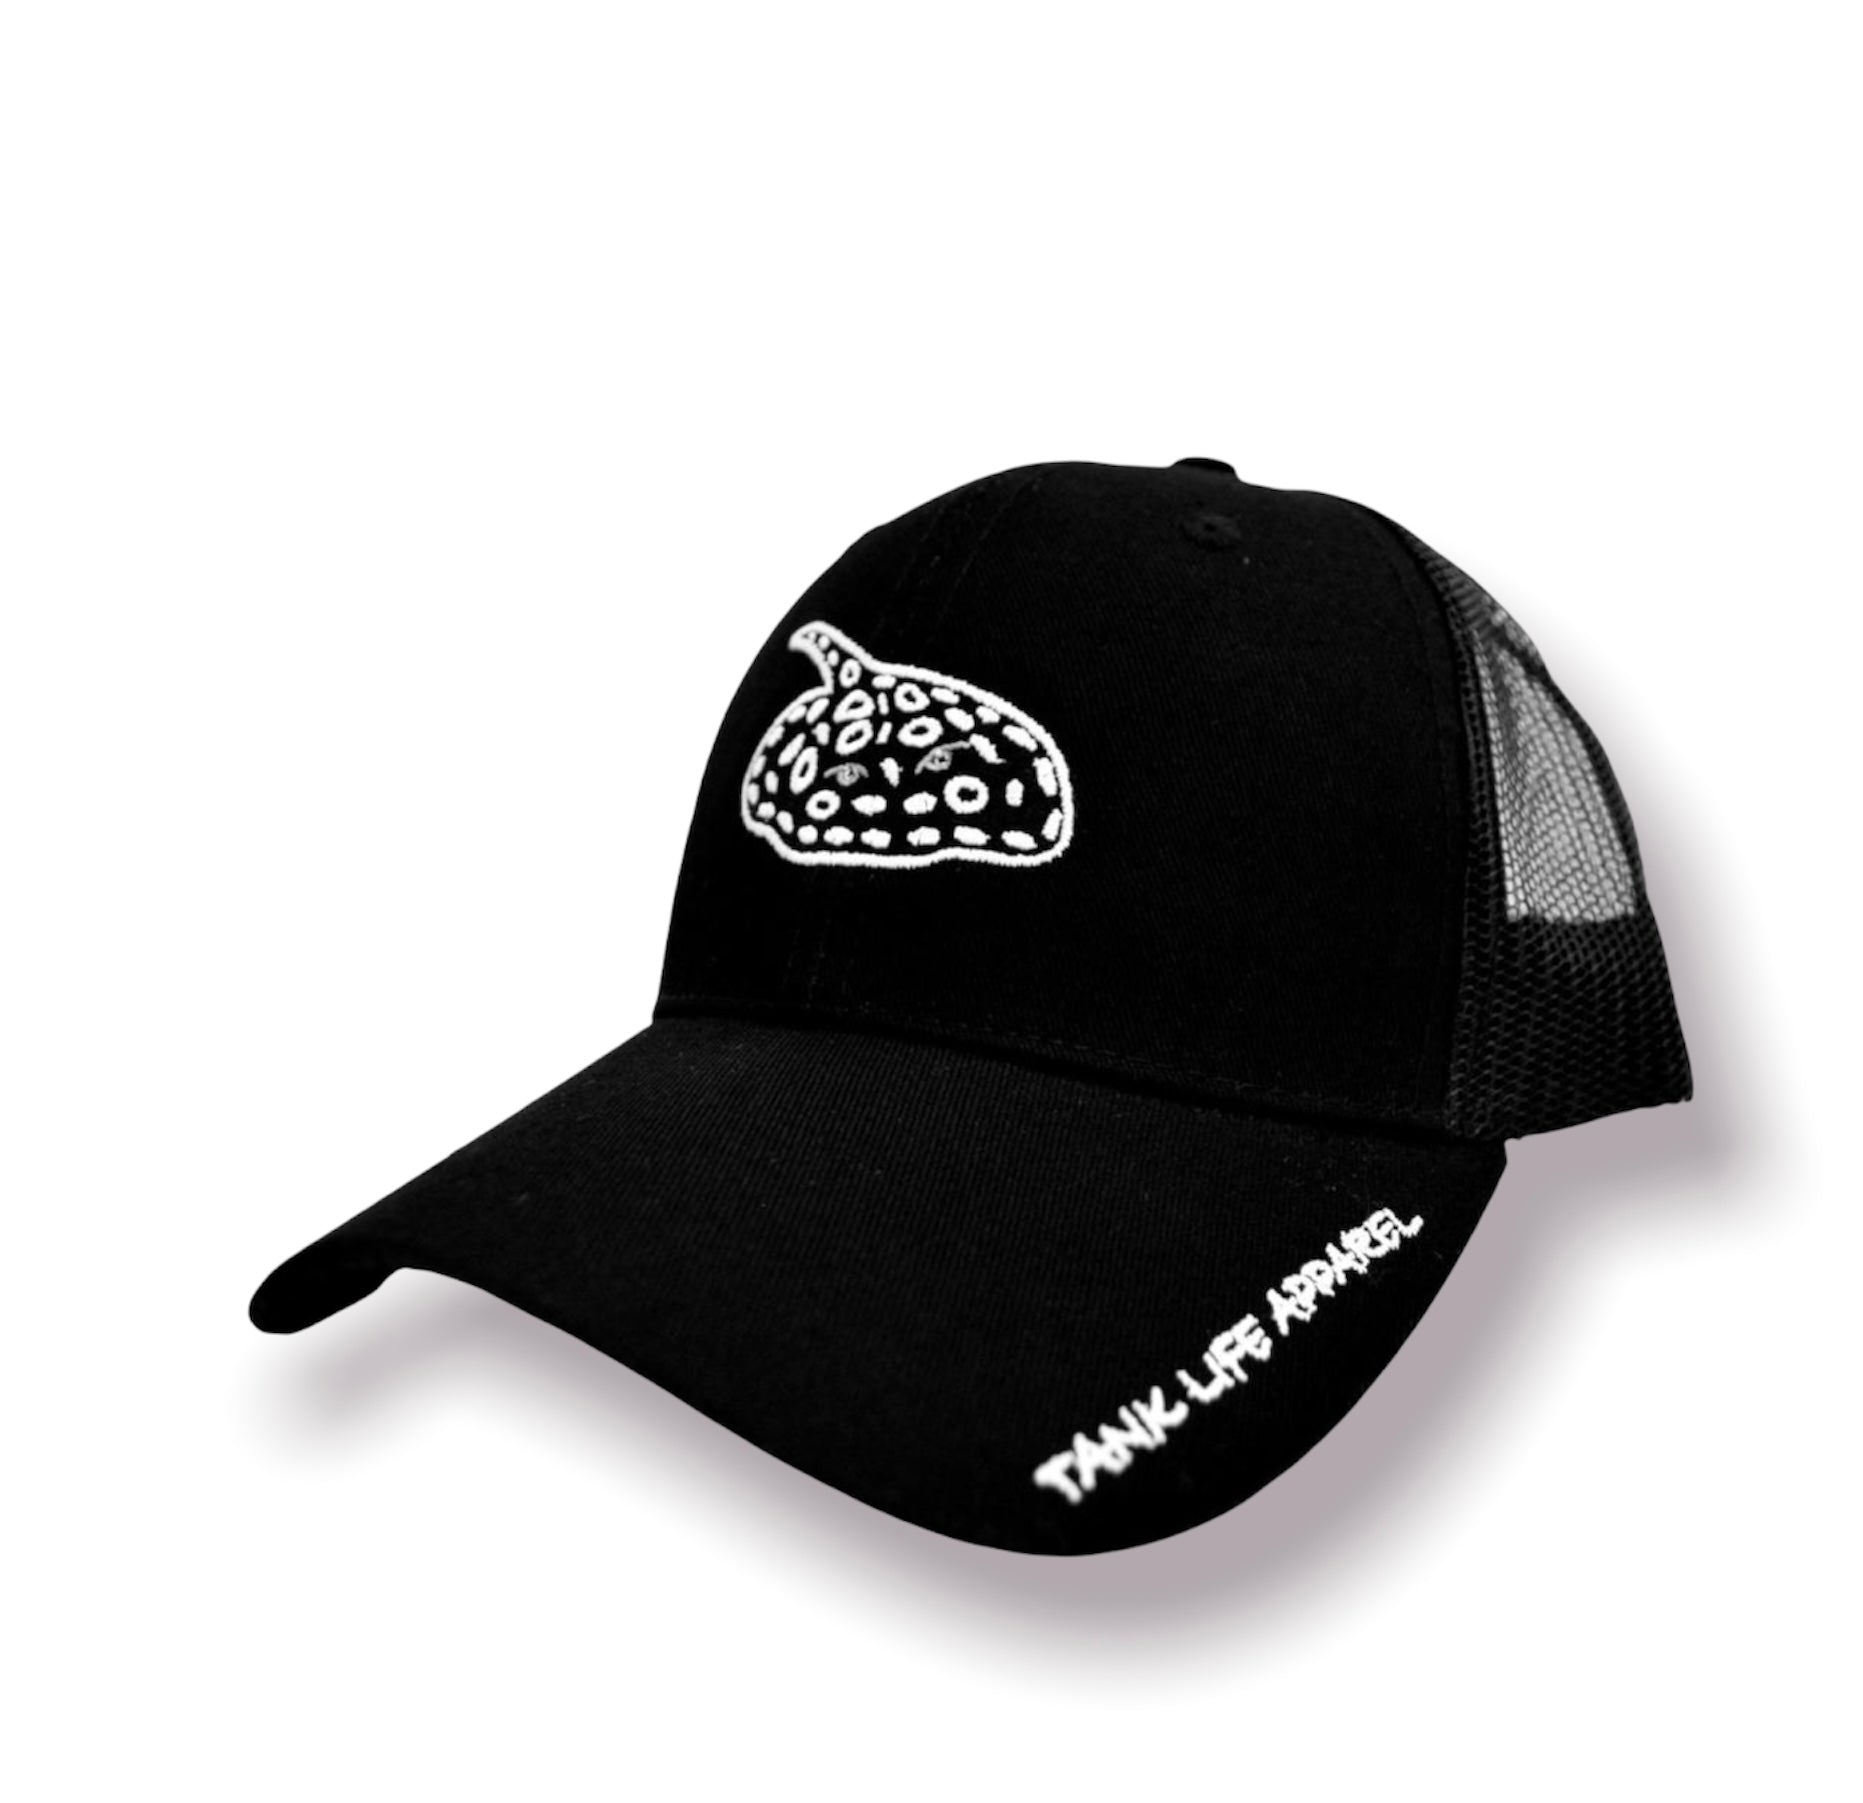 The Tank Life Apparel black diamond freshwater stingray embroidered patch on an adjustable trucker hat. black and white sting ray cap.